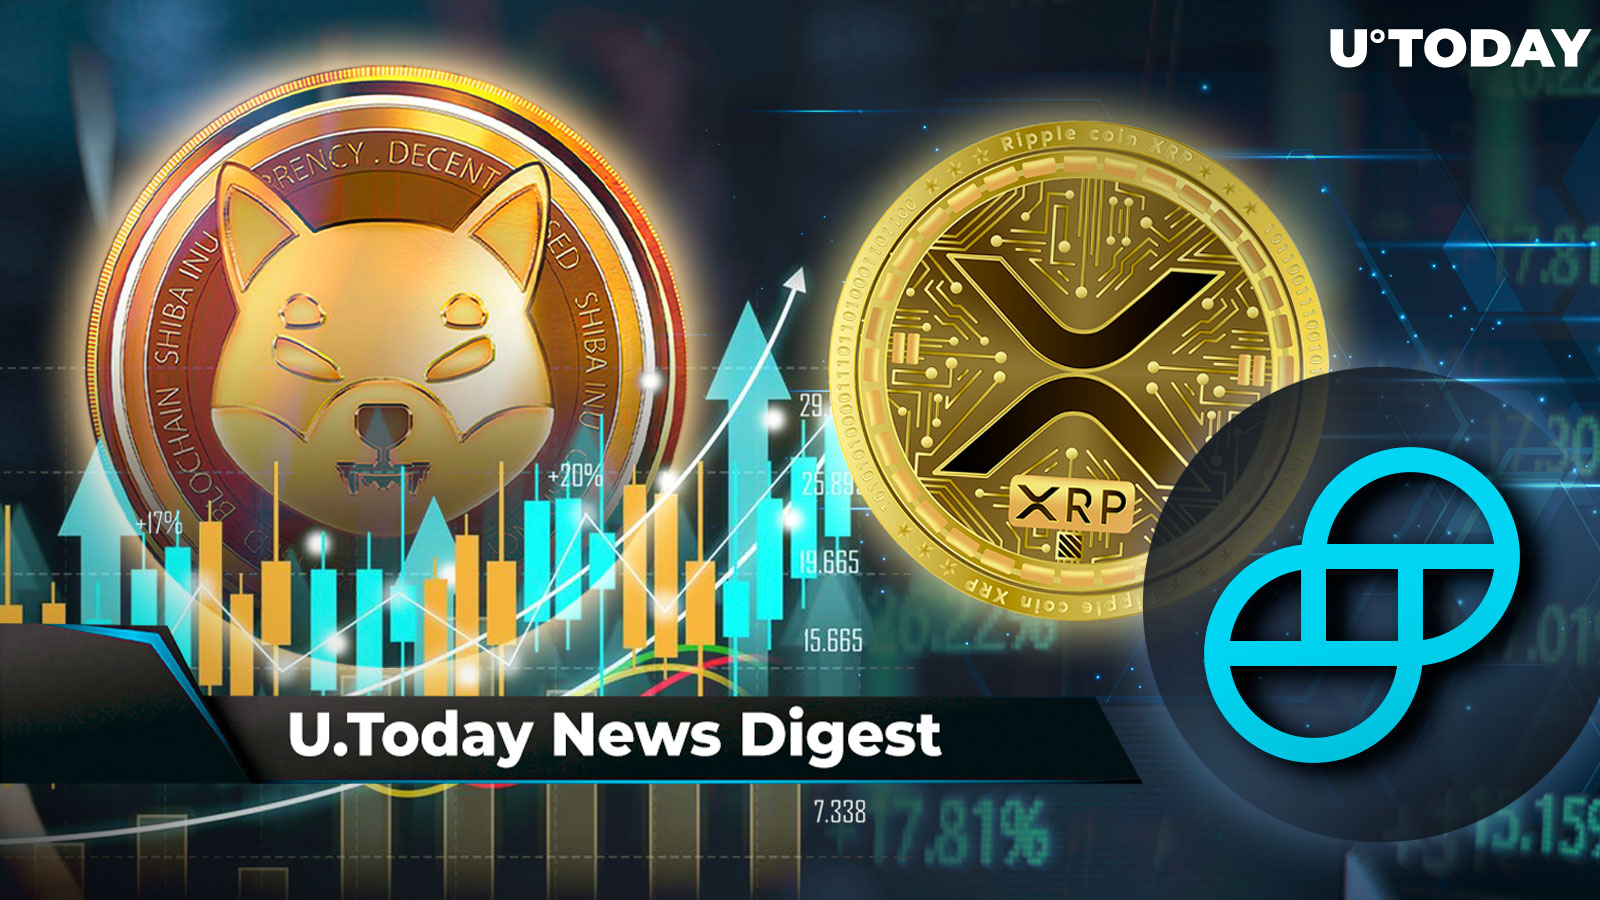 Gemini Teases Major XRP Announcement, SHIB Sees 300% Surge in up to $1 Million SHIB Transactions, XRP Gets New Recovery Chance: Crypto News Digest by U.Today